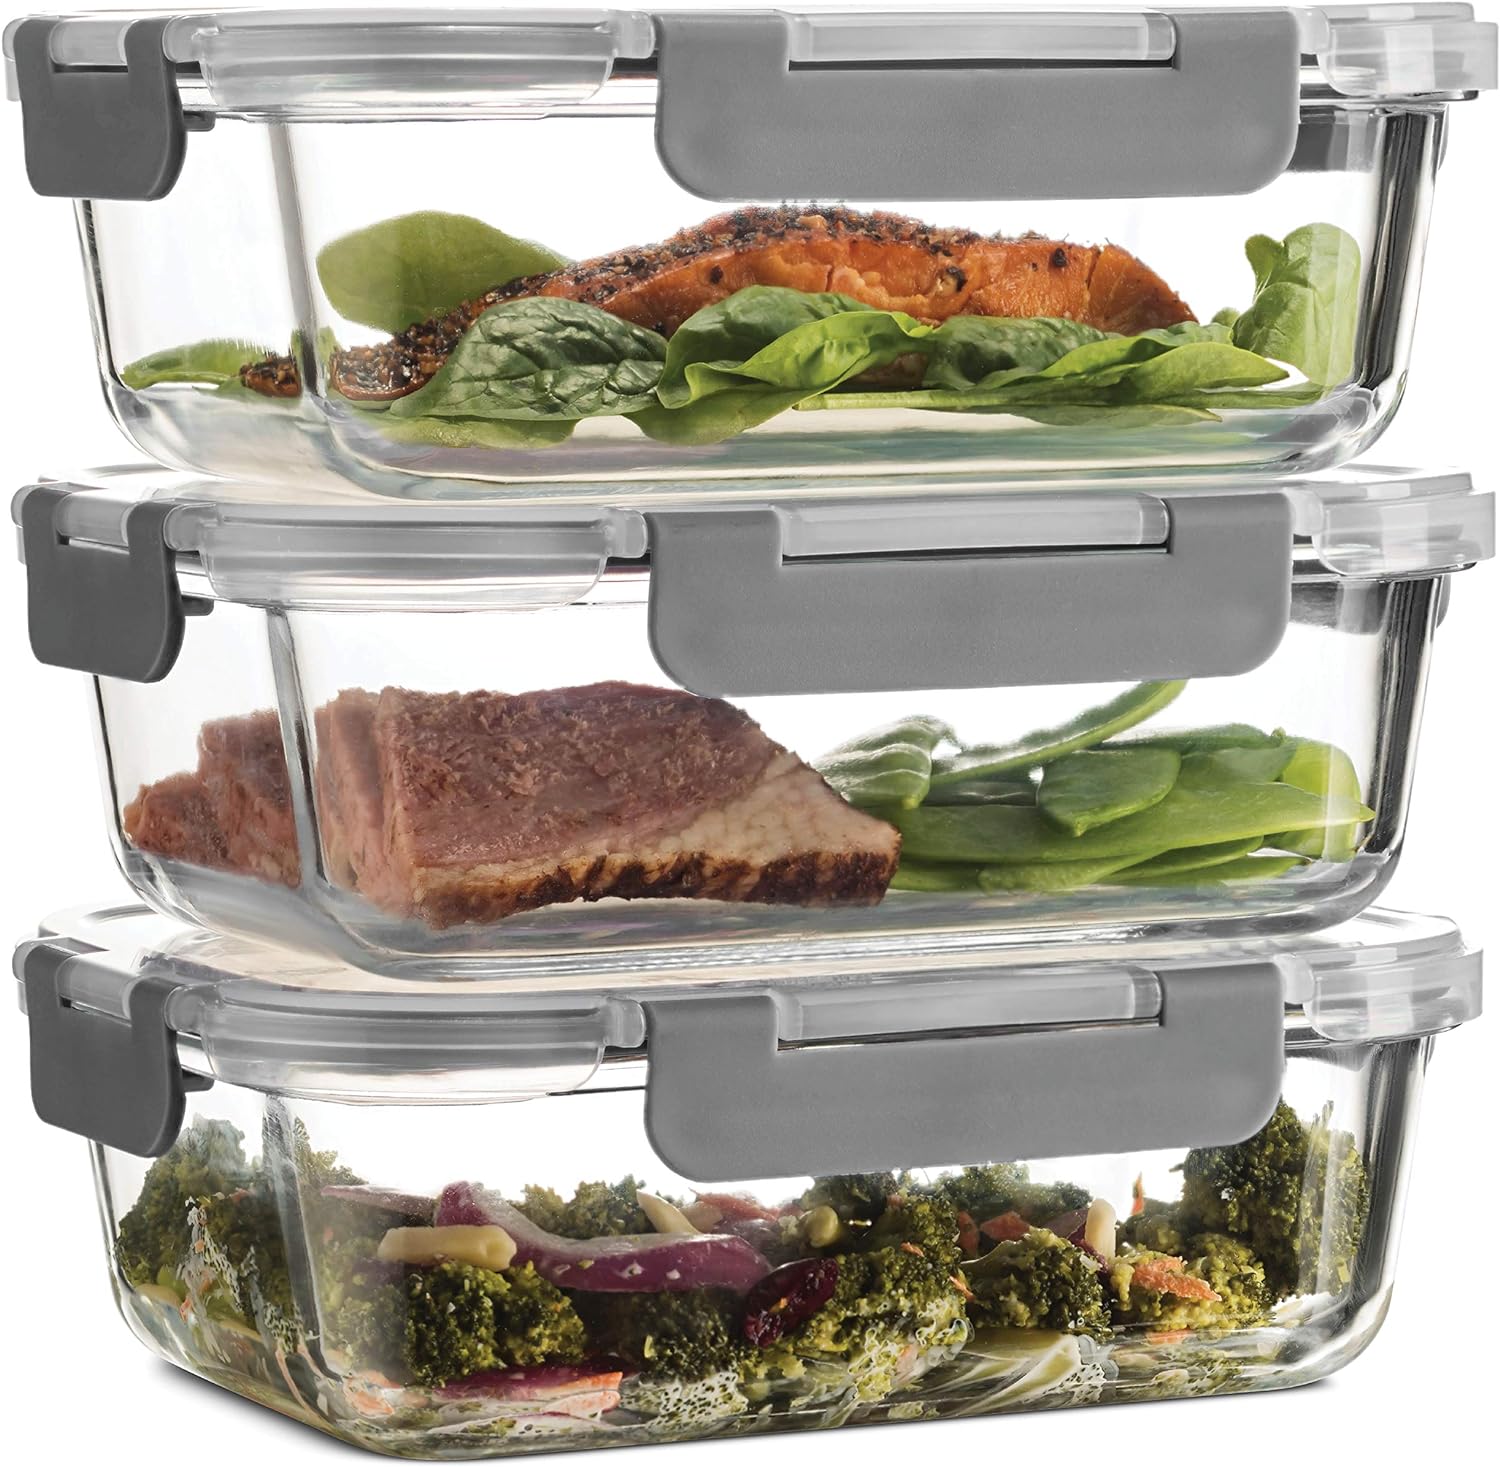 FineDine 6-Piece Superior Glass Food Storage Containers Set, 35oz Capacity - Newly Innovated Hinged Locking lids - 100% Leakproof Glass Meal-Prep Containers, Freezer-to-Oven-Safe (Grey)